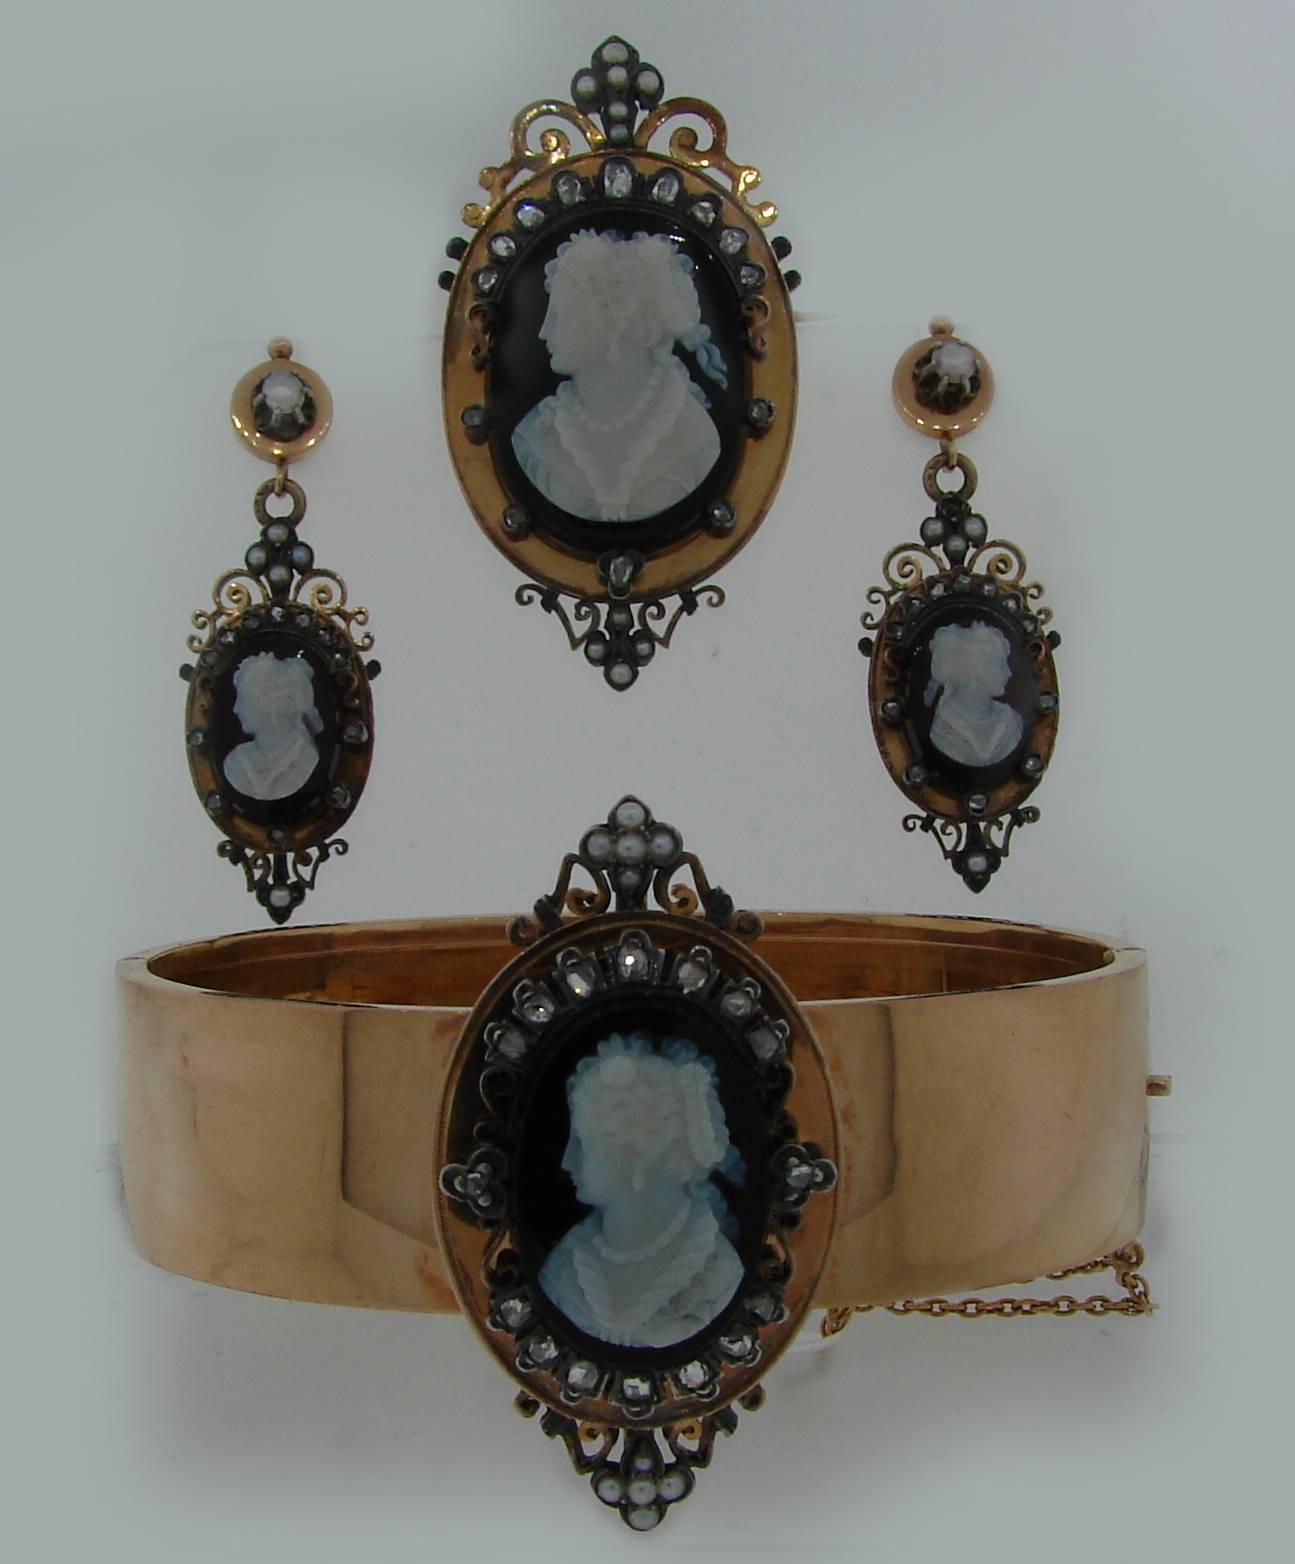 Stunning Victorian cameo set created on the turn of the 20th century in France. Consists of a bangle bracelet, a pair of earrings and a brooch / pendant. It comes in the original fitted box!

The set is made of 18k (hallmarked) yellow gold and